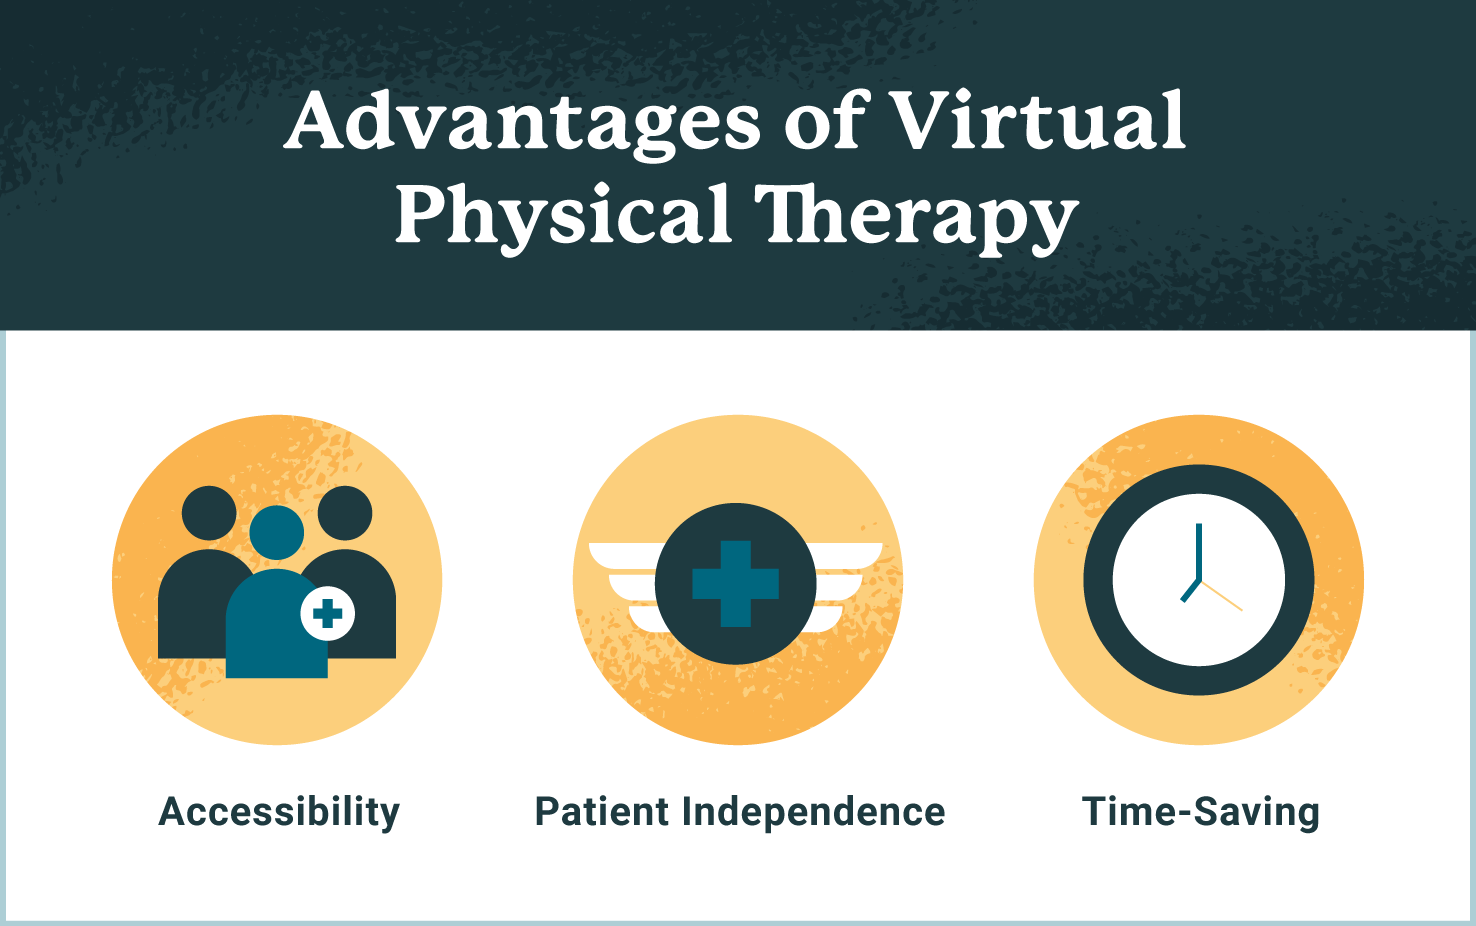 Illustration of the three main advantages of virtual physical therapy: accessibility, patient independence, and time-saving.